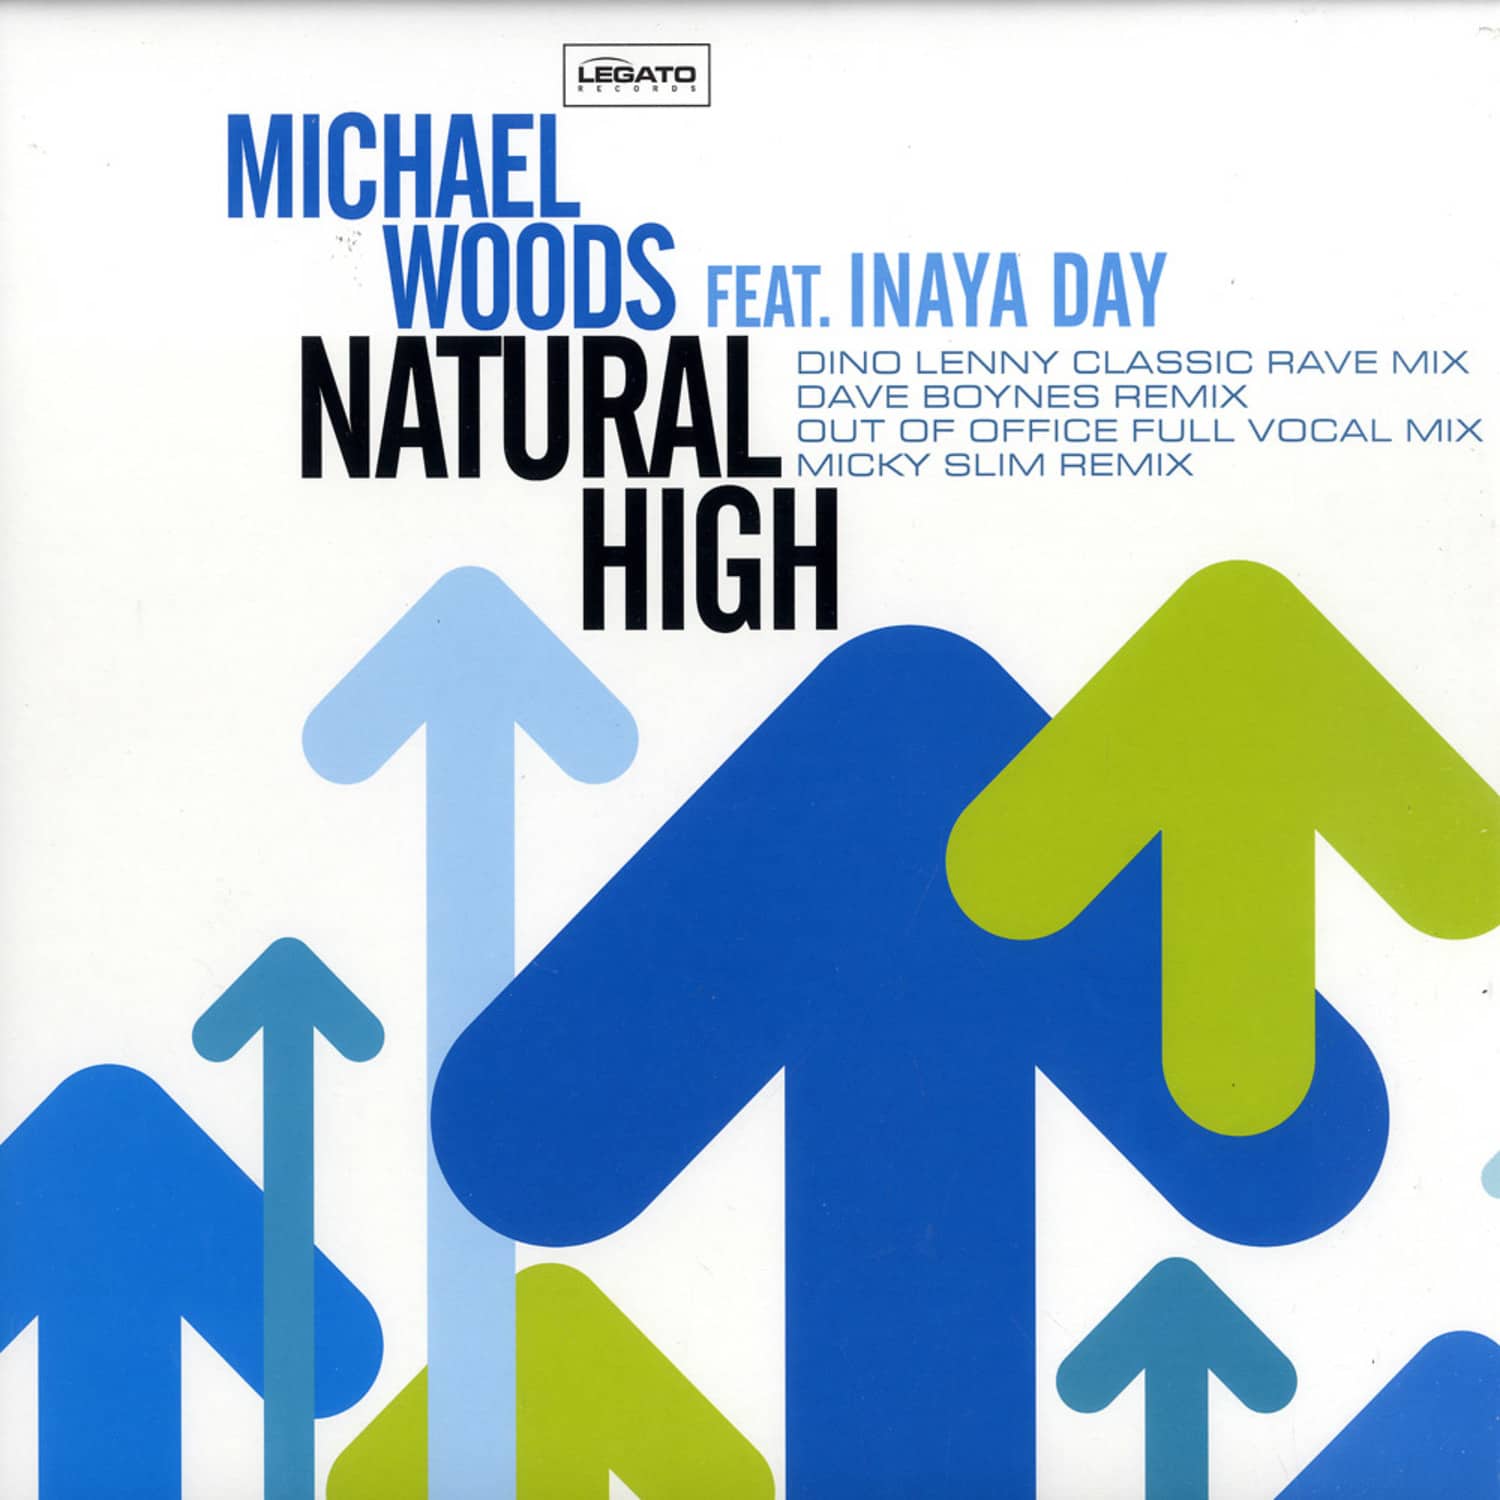 Michael Woods feat. Inaya Day - NATURAL HIGH